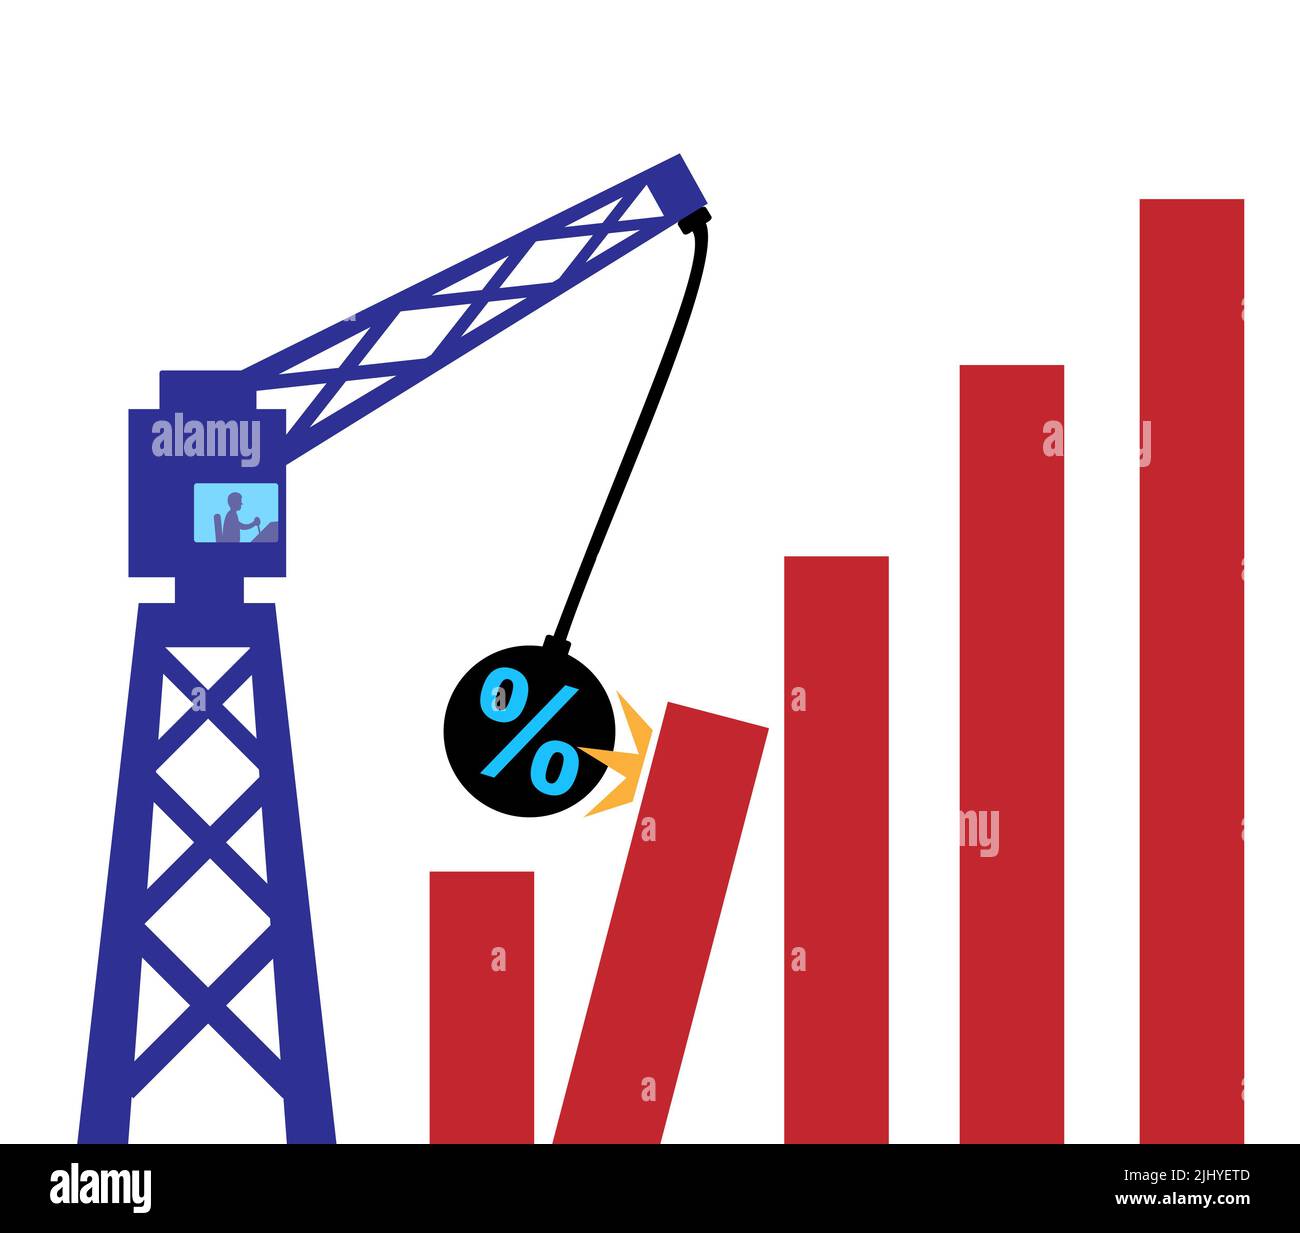 A metaphor using a wrecking ball with a percentage symbol crashing into a bar chart to illustrate the impact of interest rates on global growth. Stock Photo